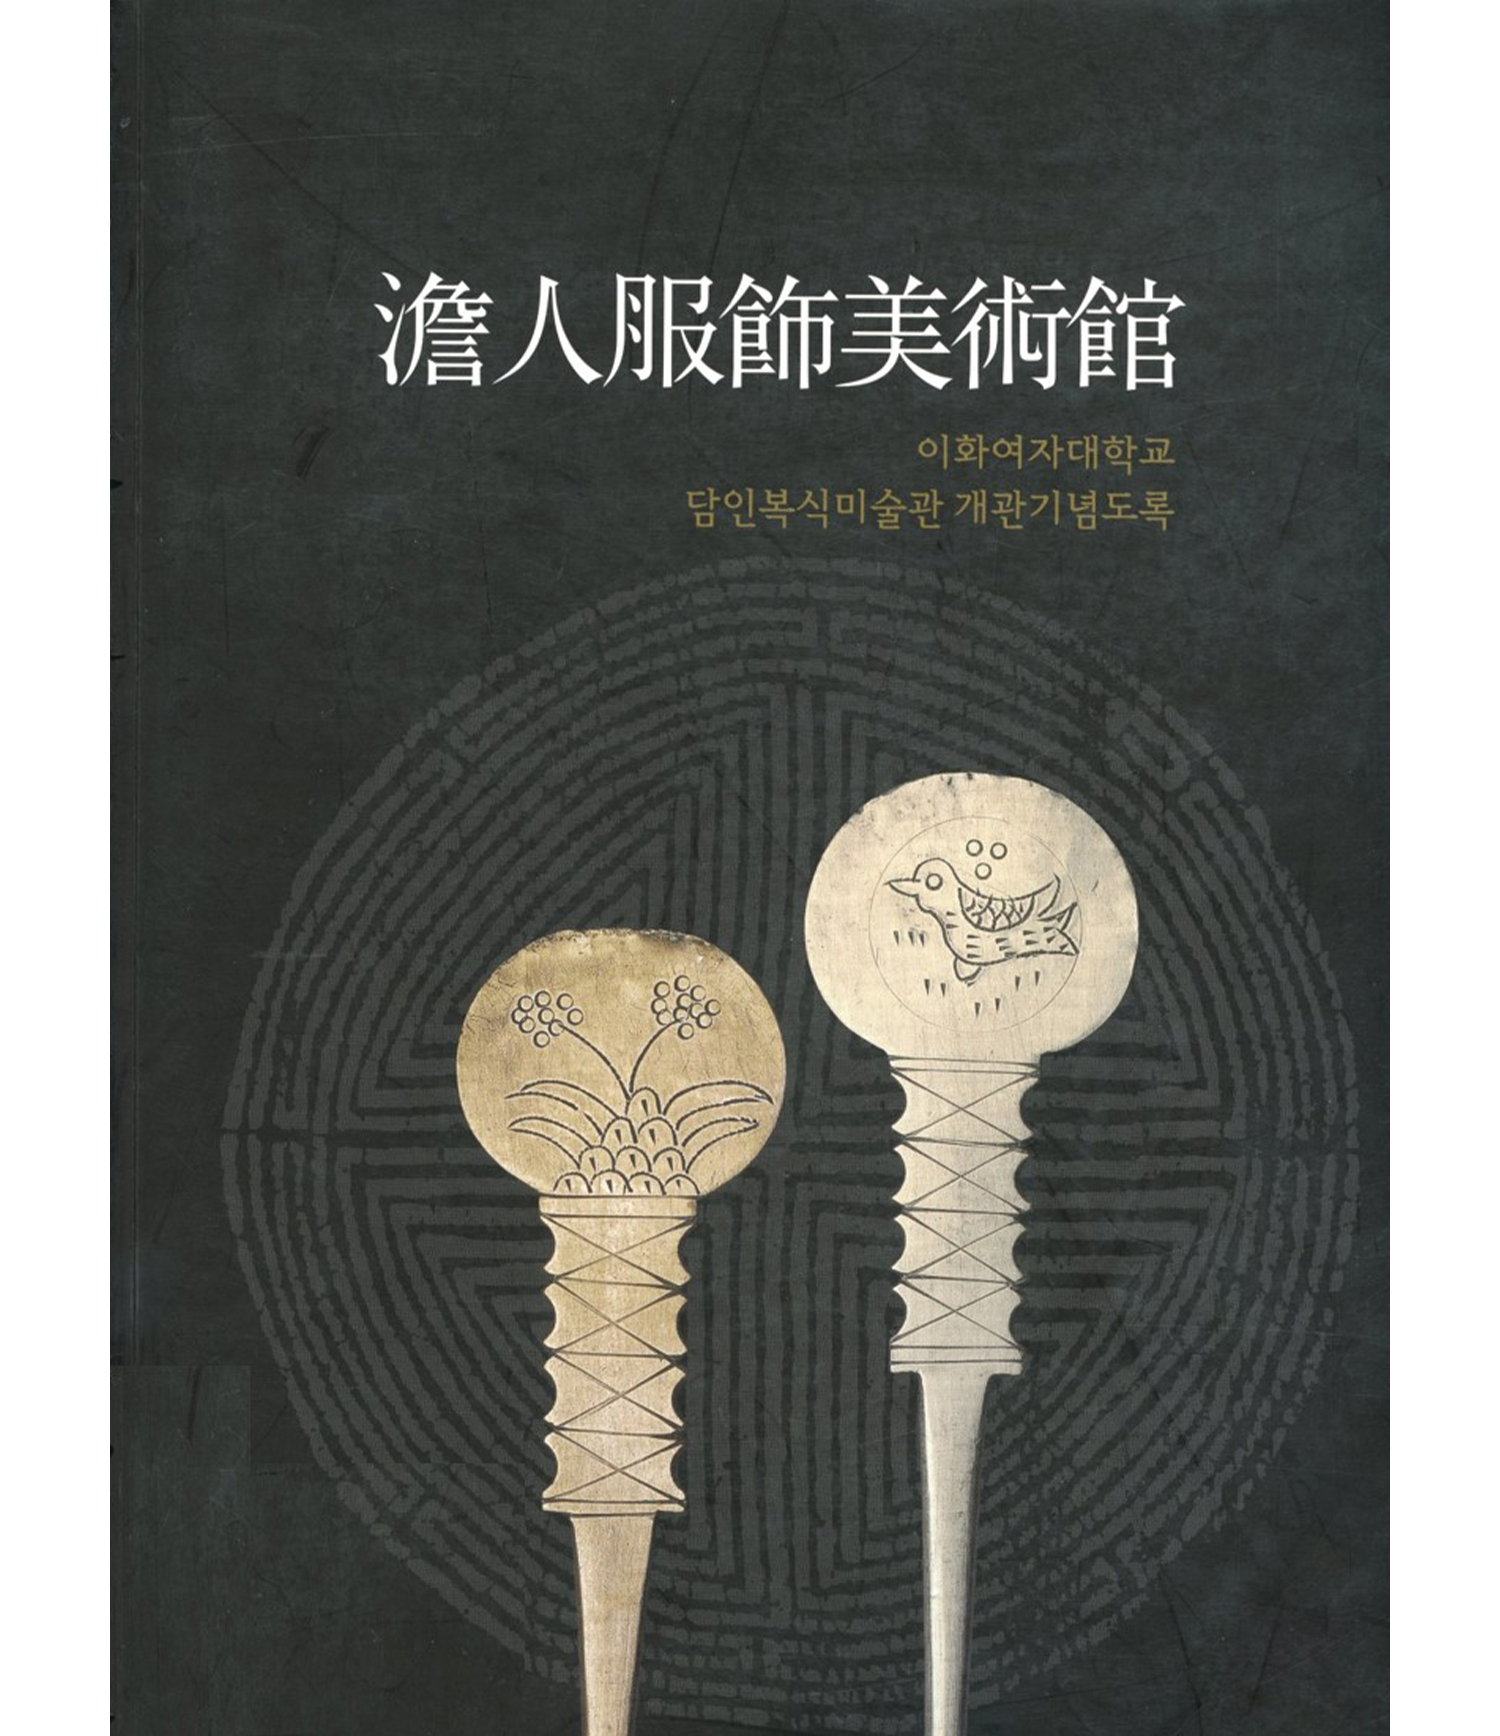 The Inaugural Exhibition Catalogue of the Chang Pudeok Memorial Gallery